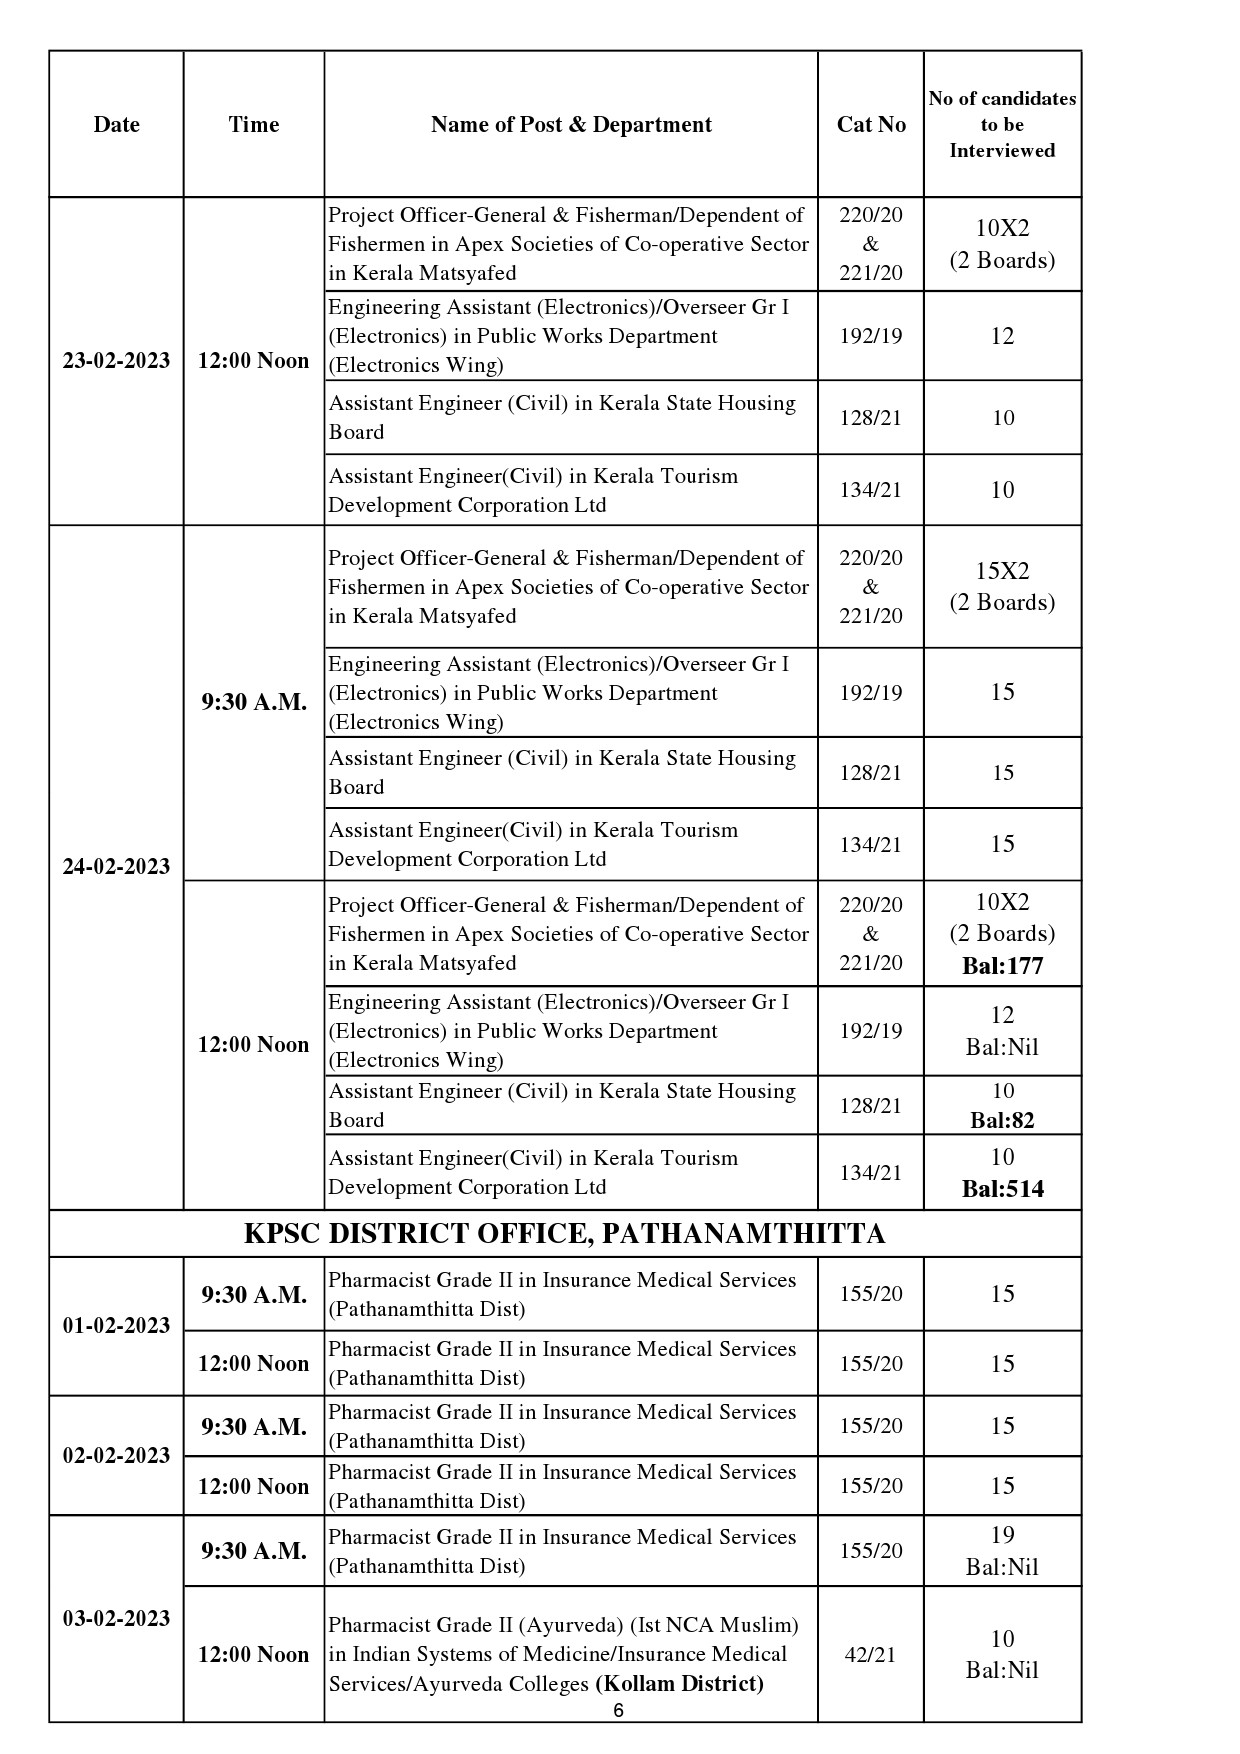 KPSC Interview Programme For The Month Of February 2023 - Notification Image 6